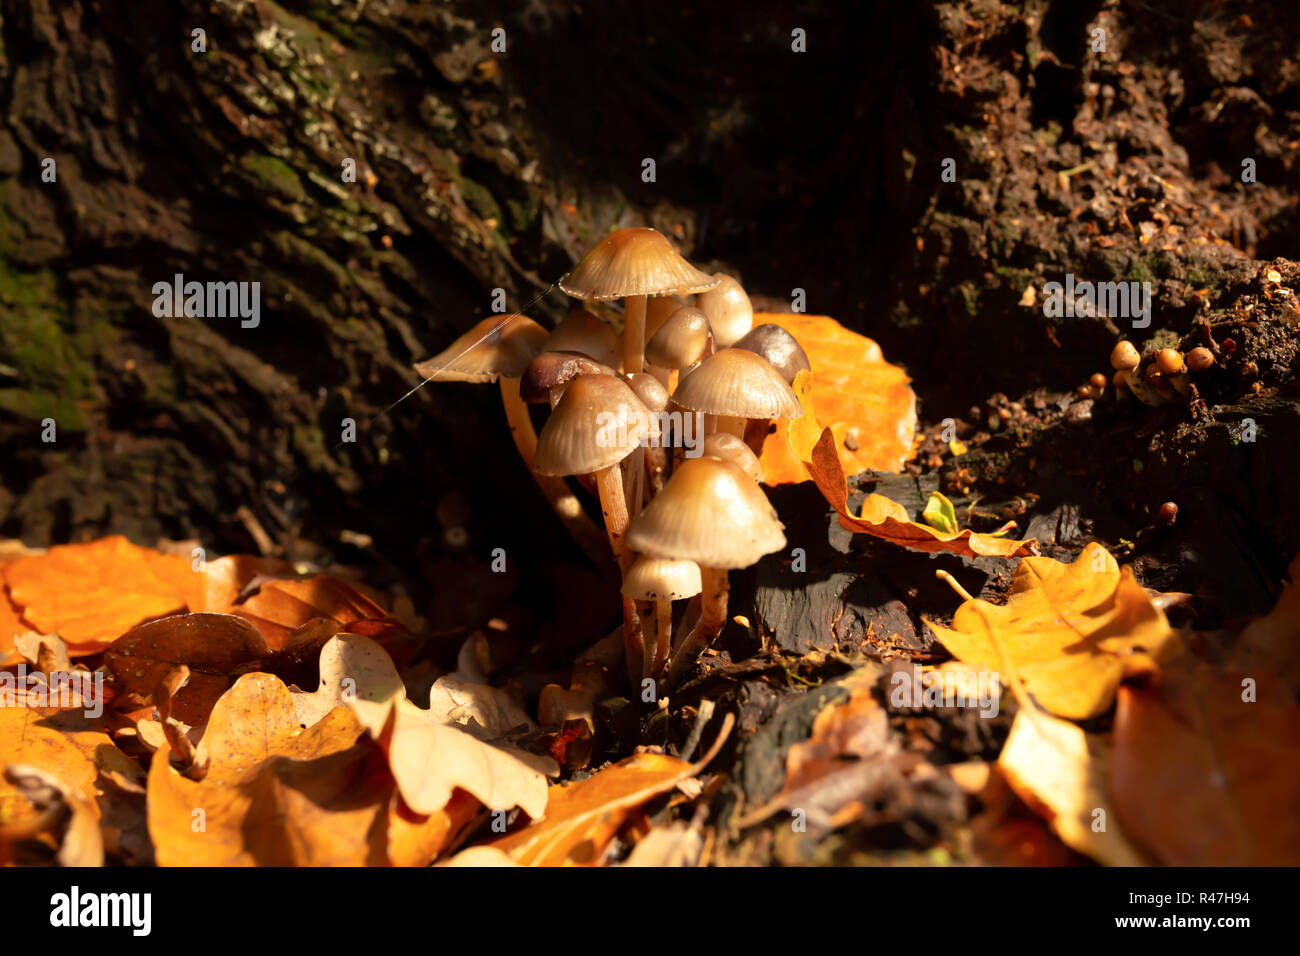 Macro colour photograph of two clump of Oak-stump mushrooms within old tree stump in landscape orientation. Stock Photo